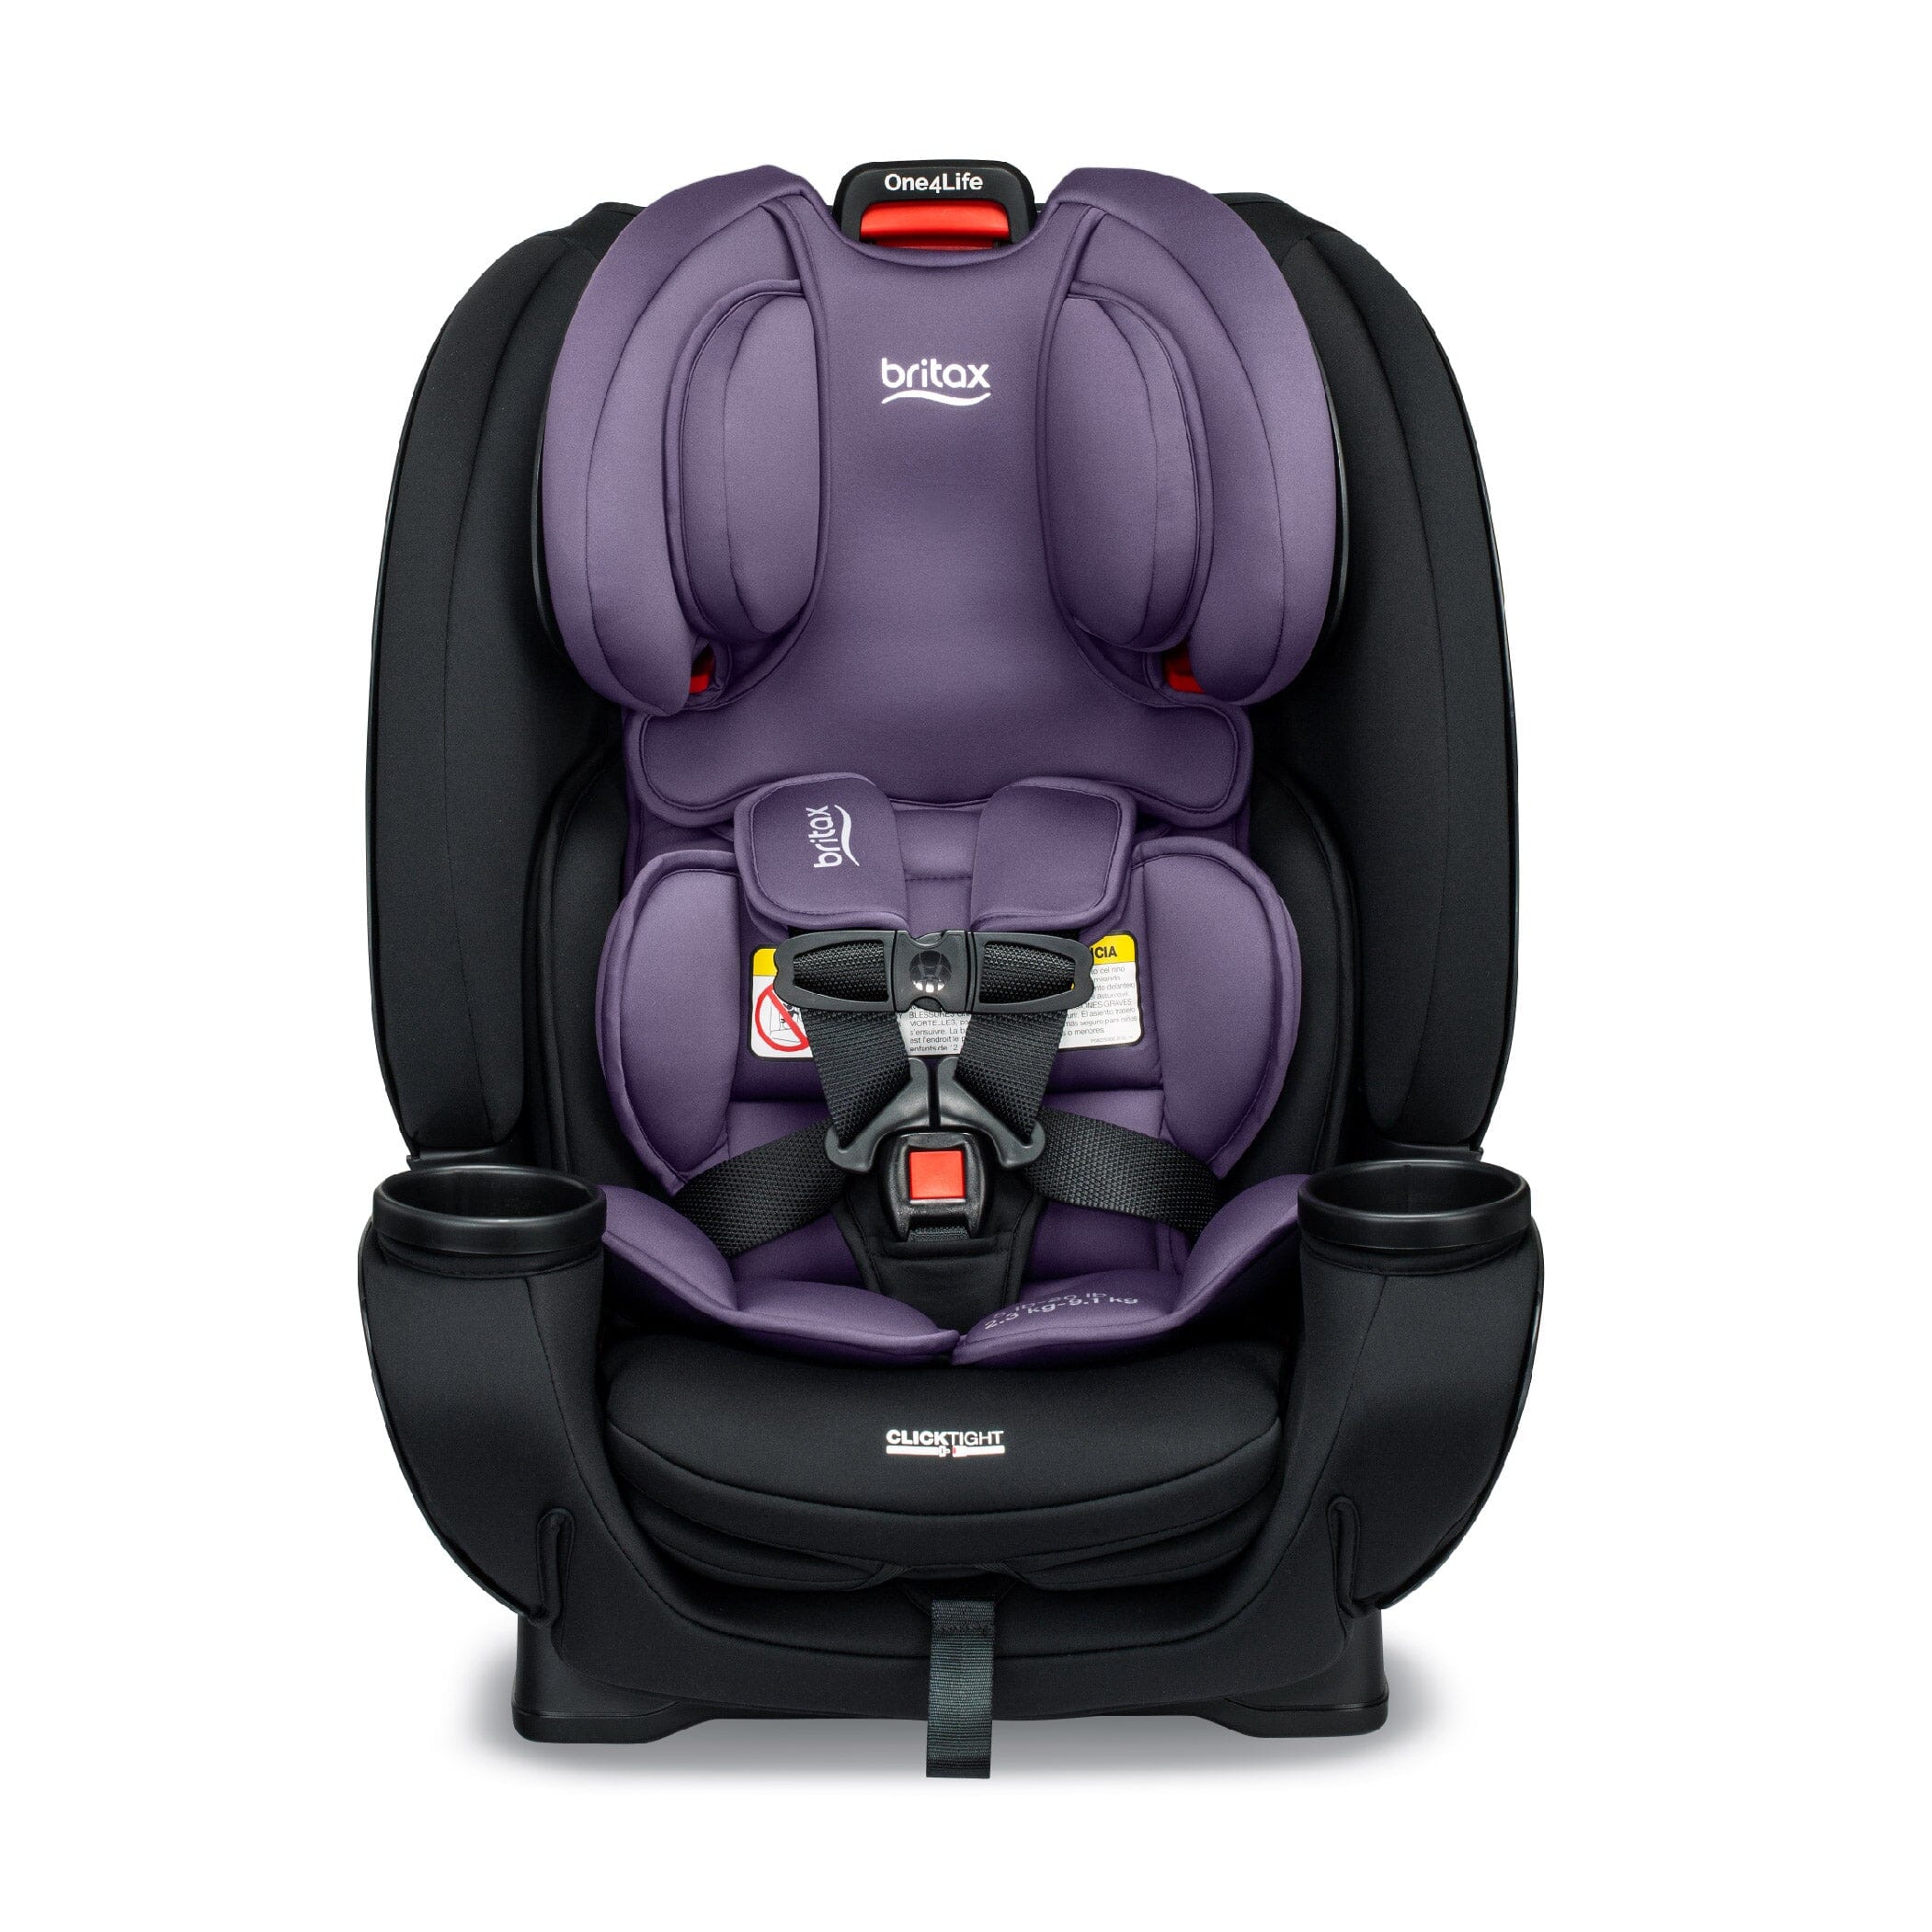 Britax One4Life All-in-One Car Seat Child Seat